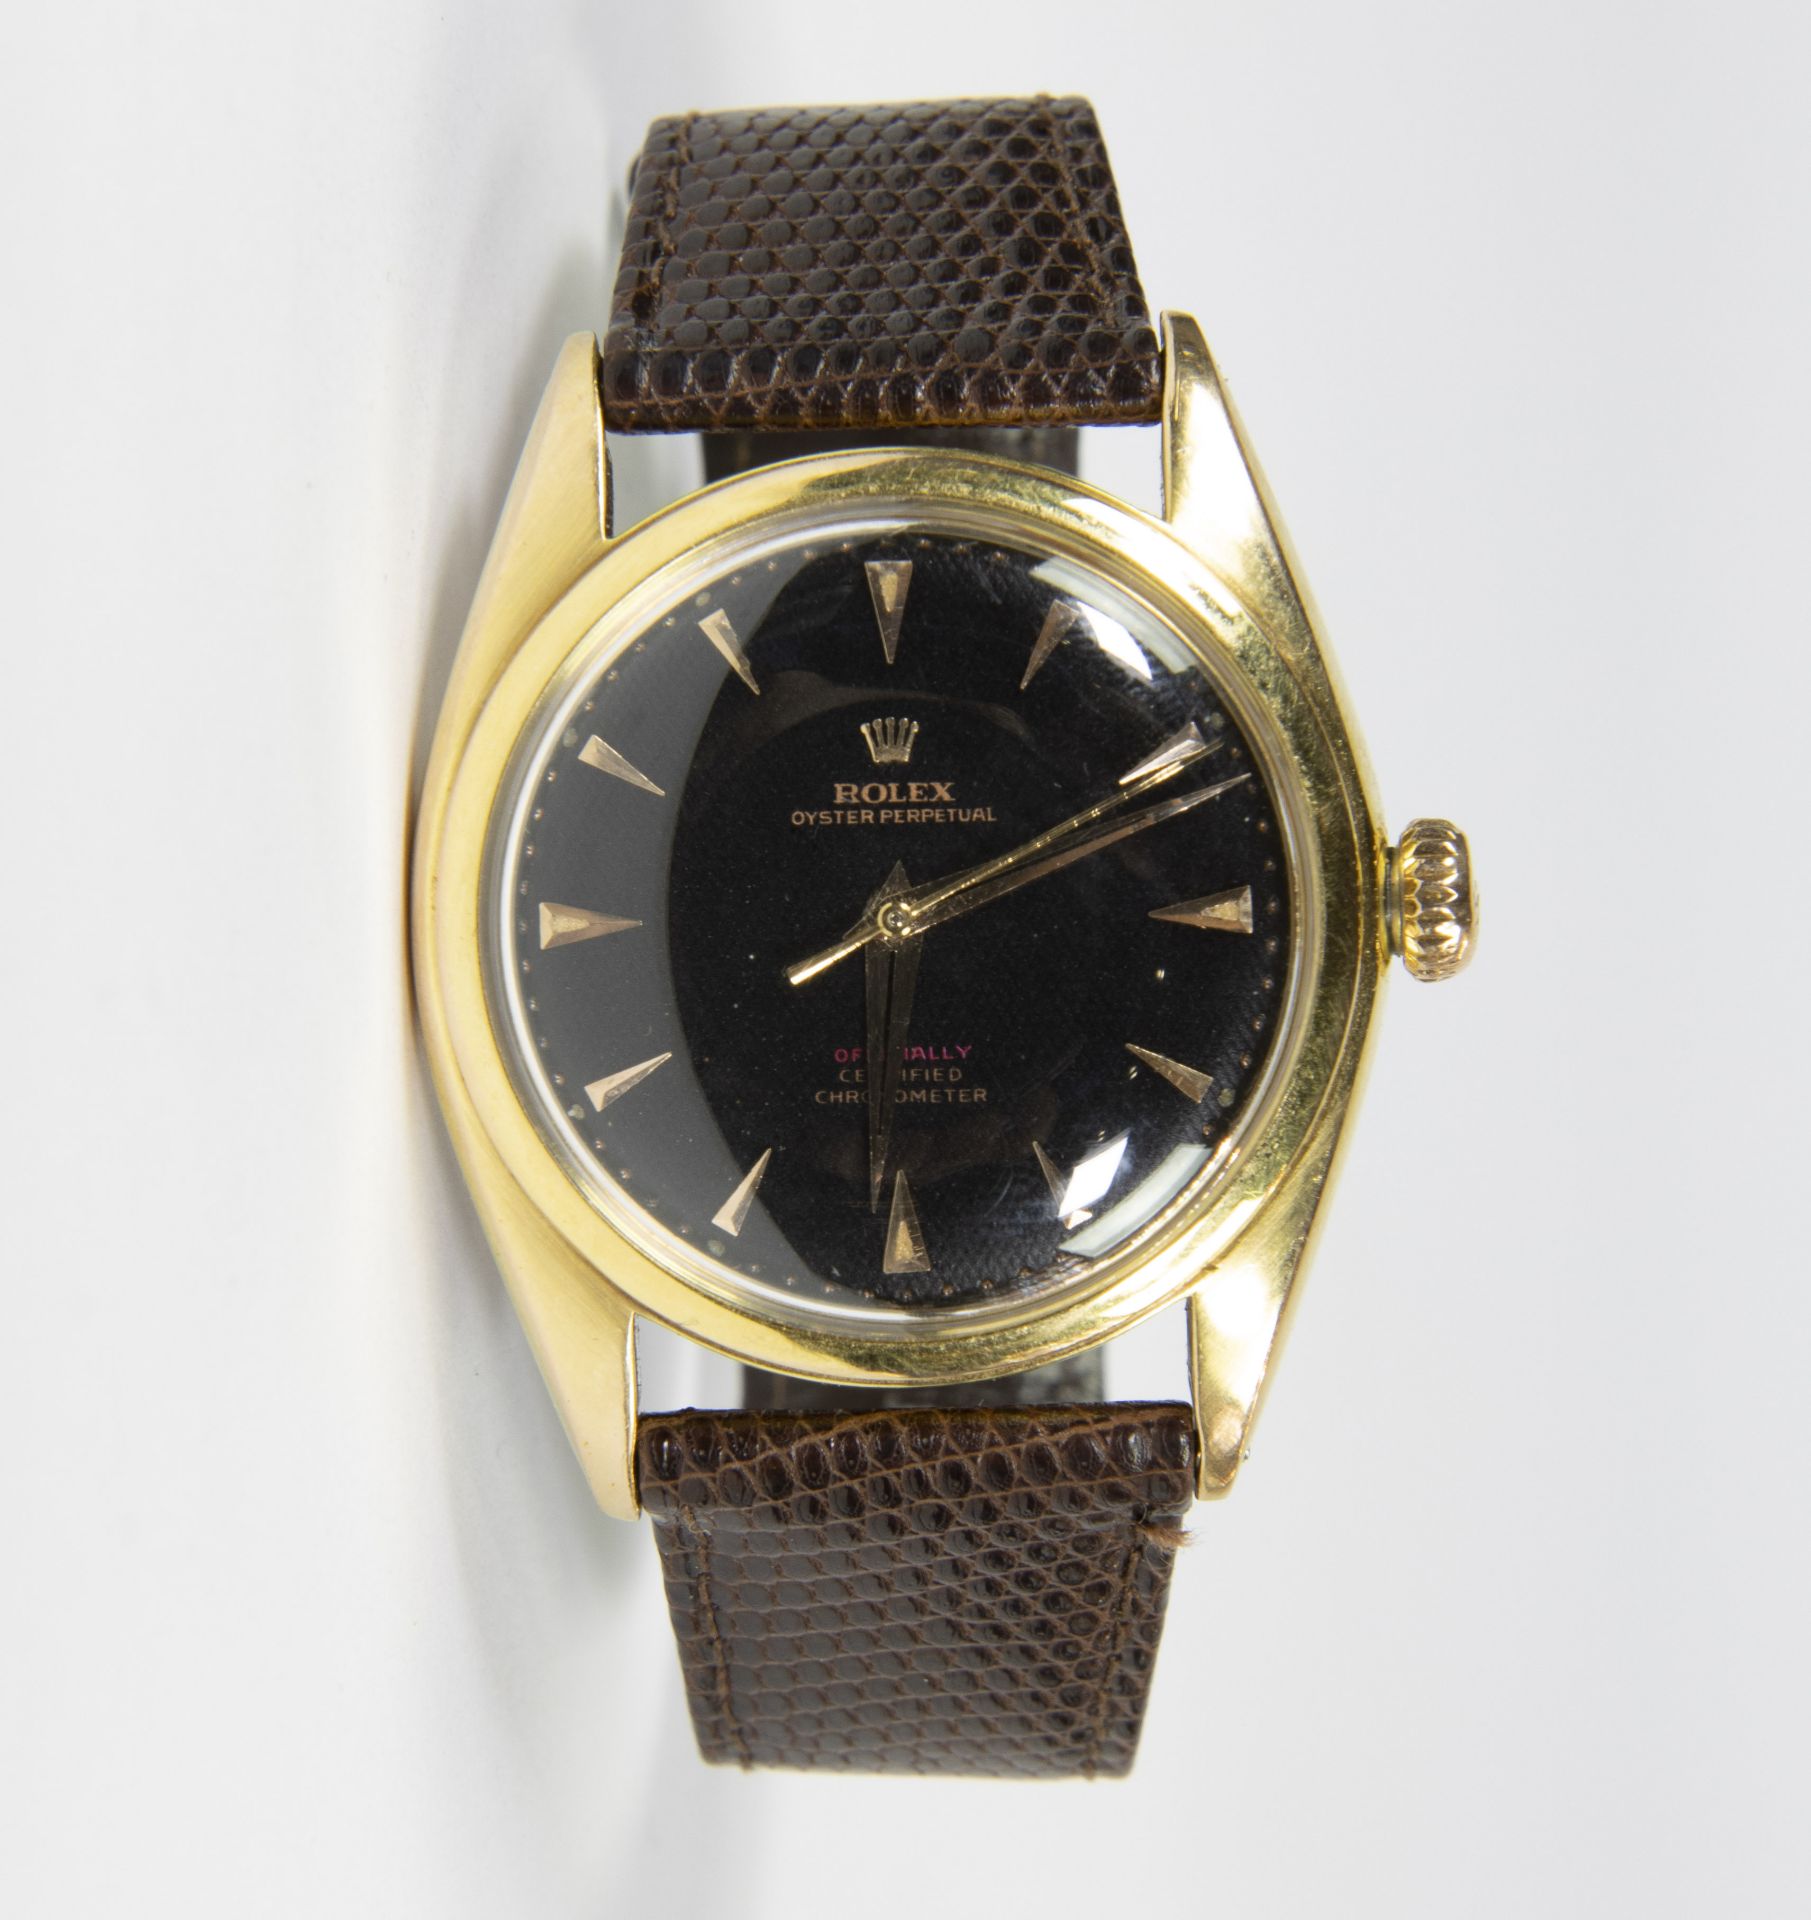 Extremely rare 1950's men's Rolex Oyster Perpetual ref 6029, crown 1951